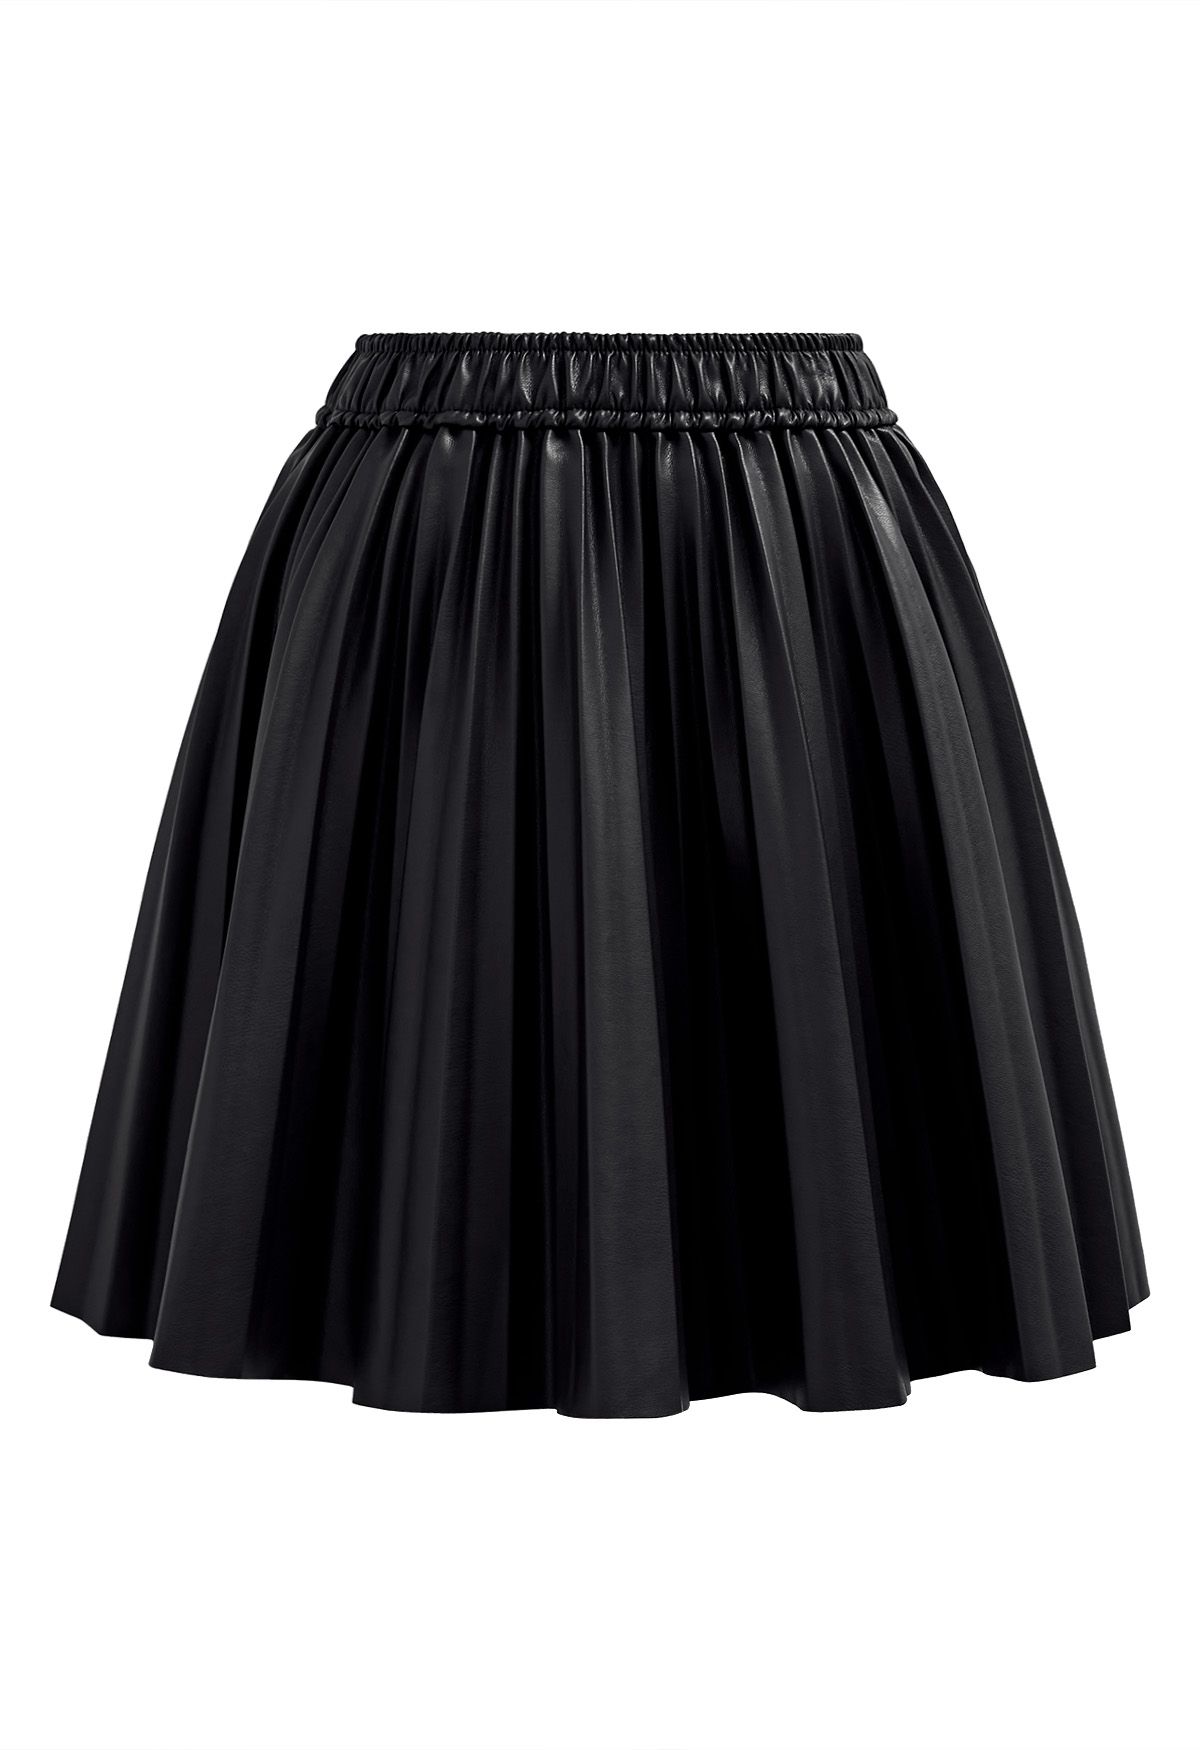 Faux Leather Pleated Mini Skirt in Black - Retro, Indie and Unique Fashion